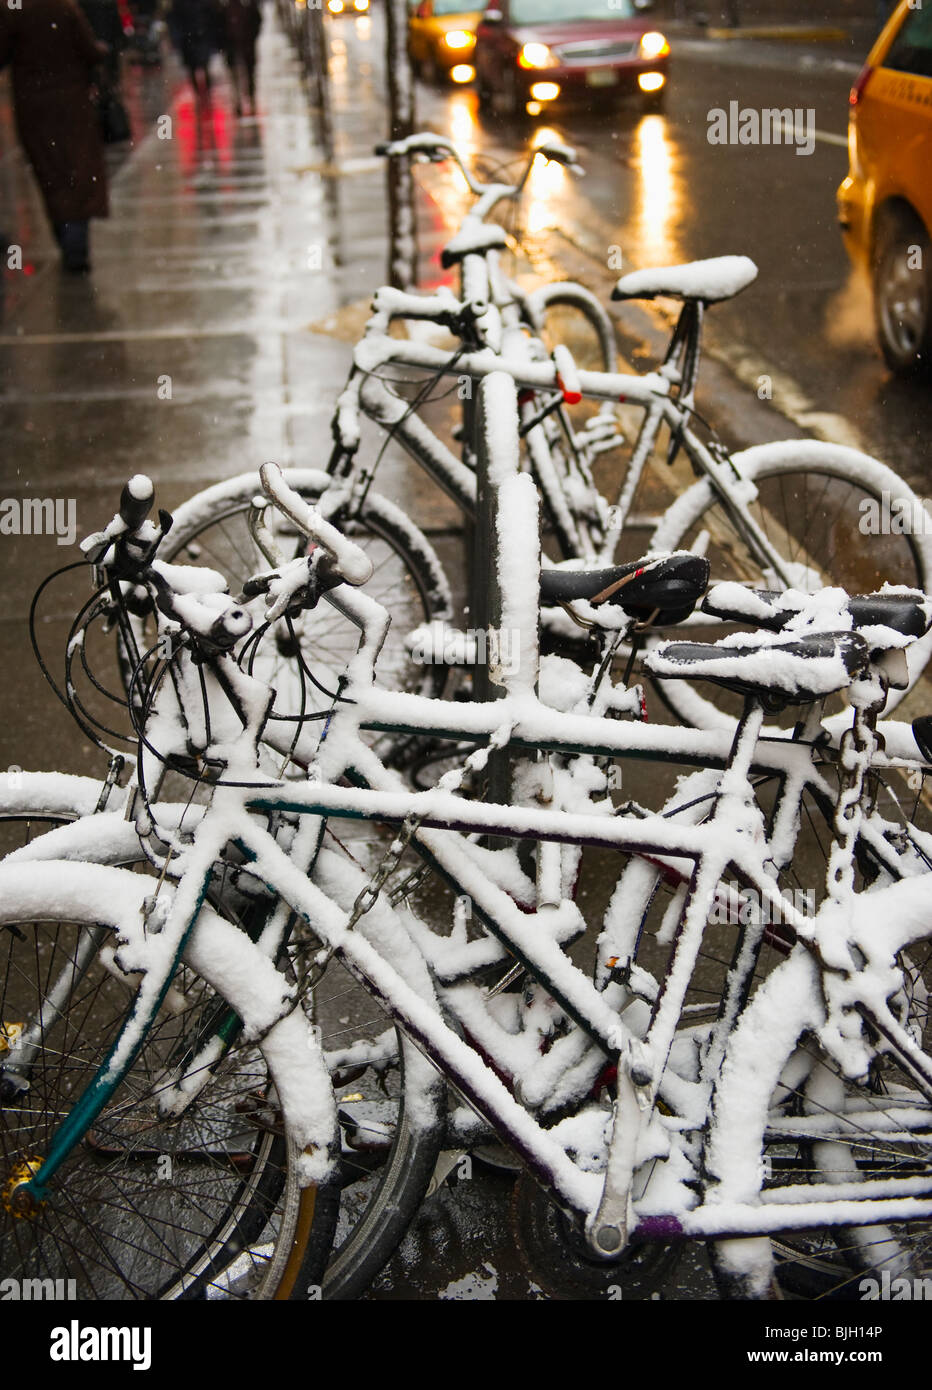 Bicycles covered in snow Stock Photo